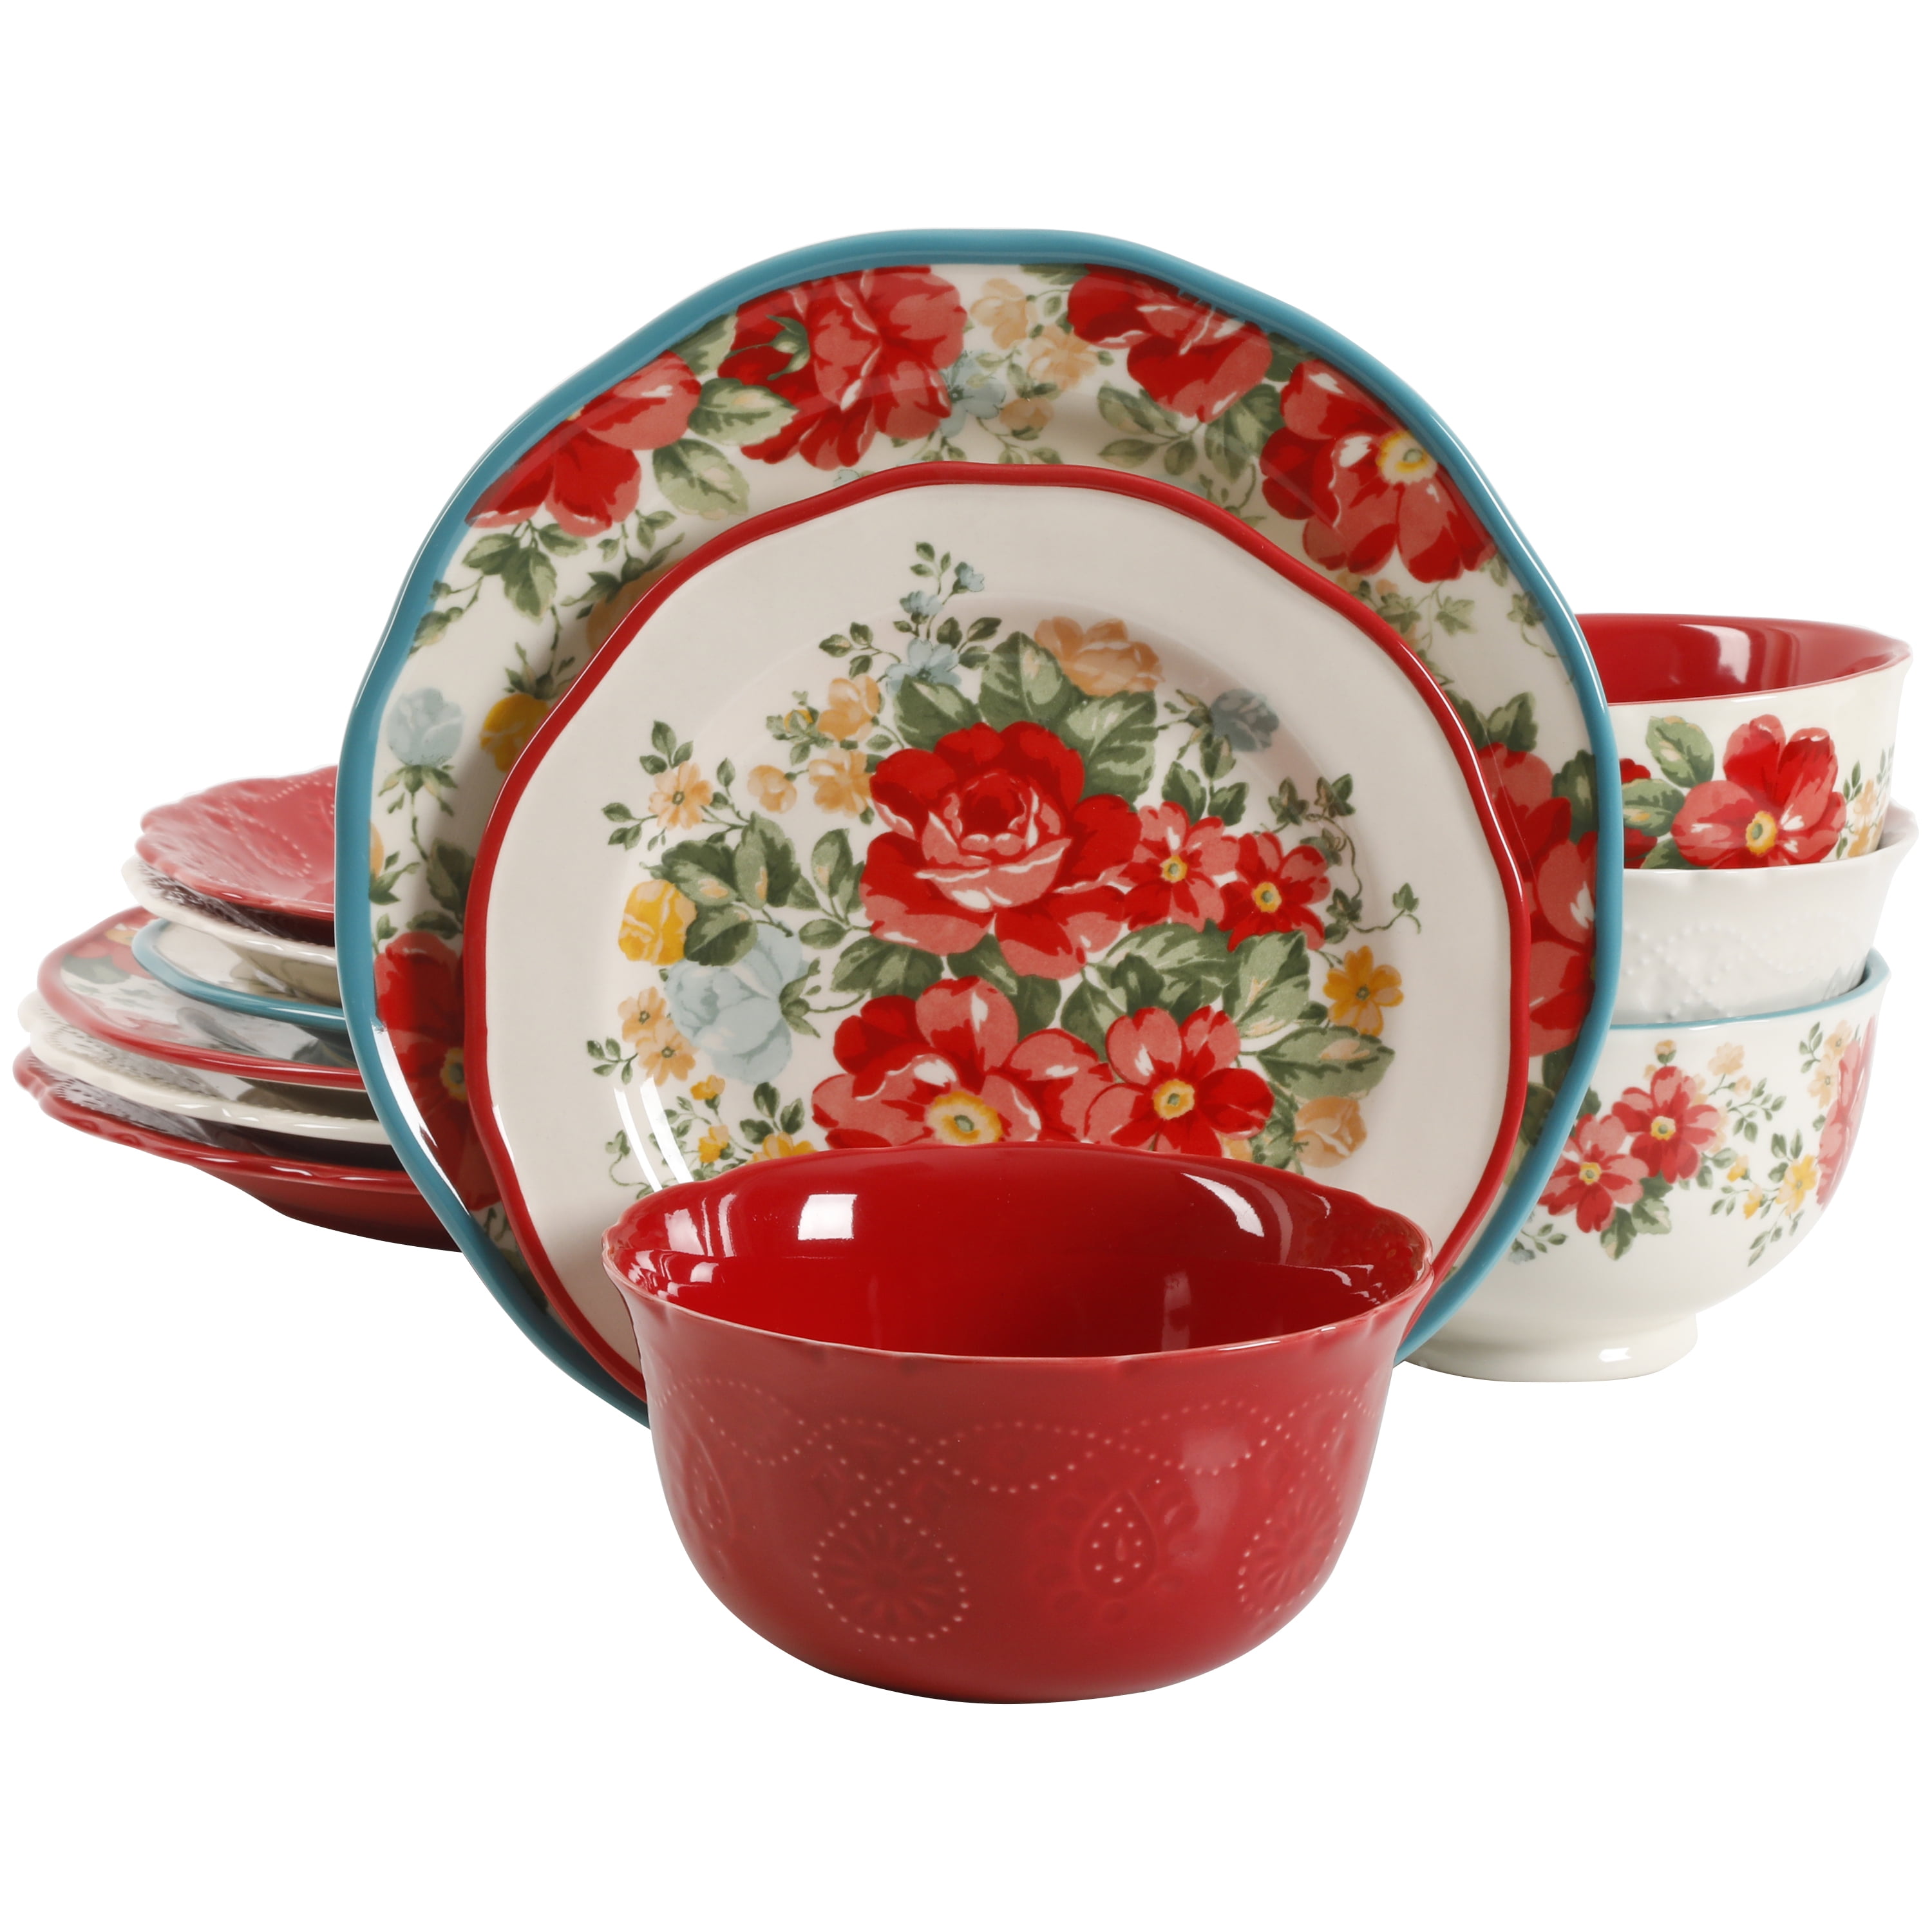 Service for 4 Vintage Mix Match Dishes Pioneer Woman 12-Piece Dinnerware Set 